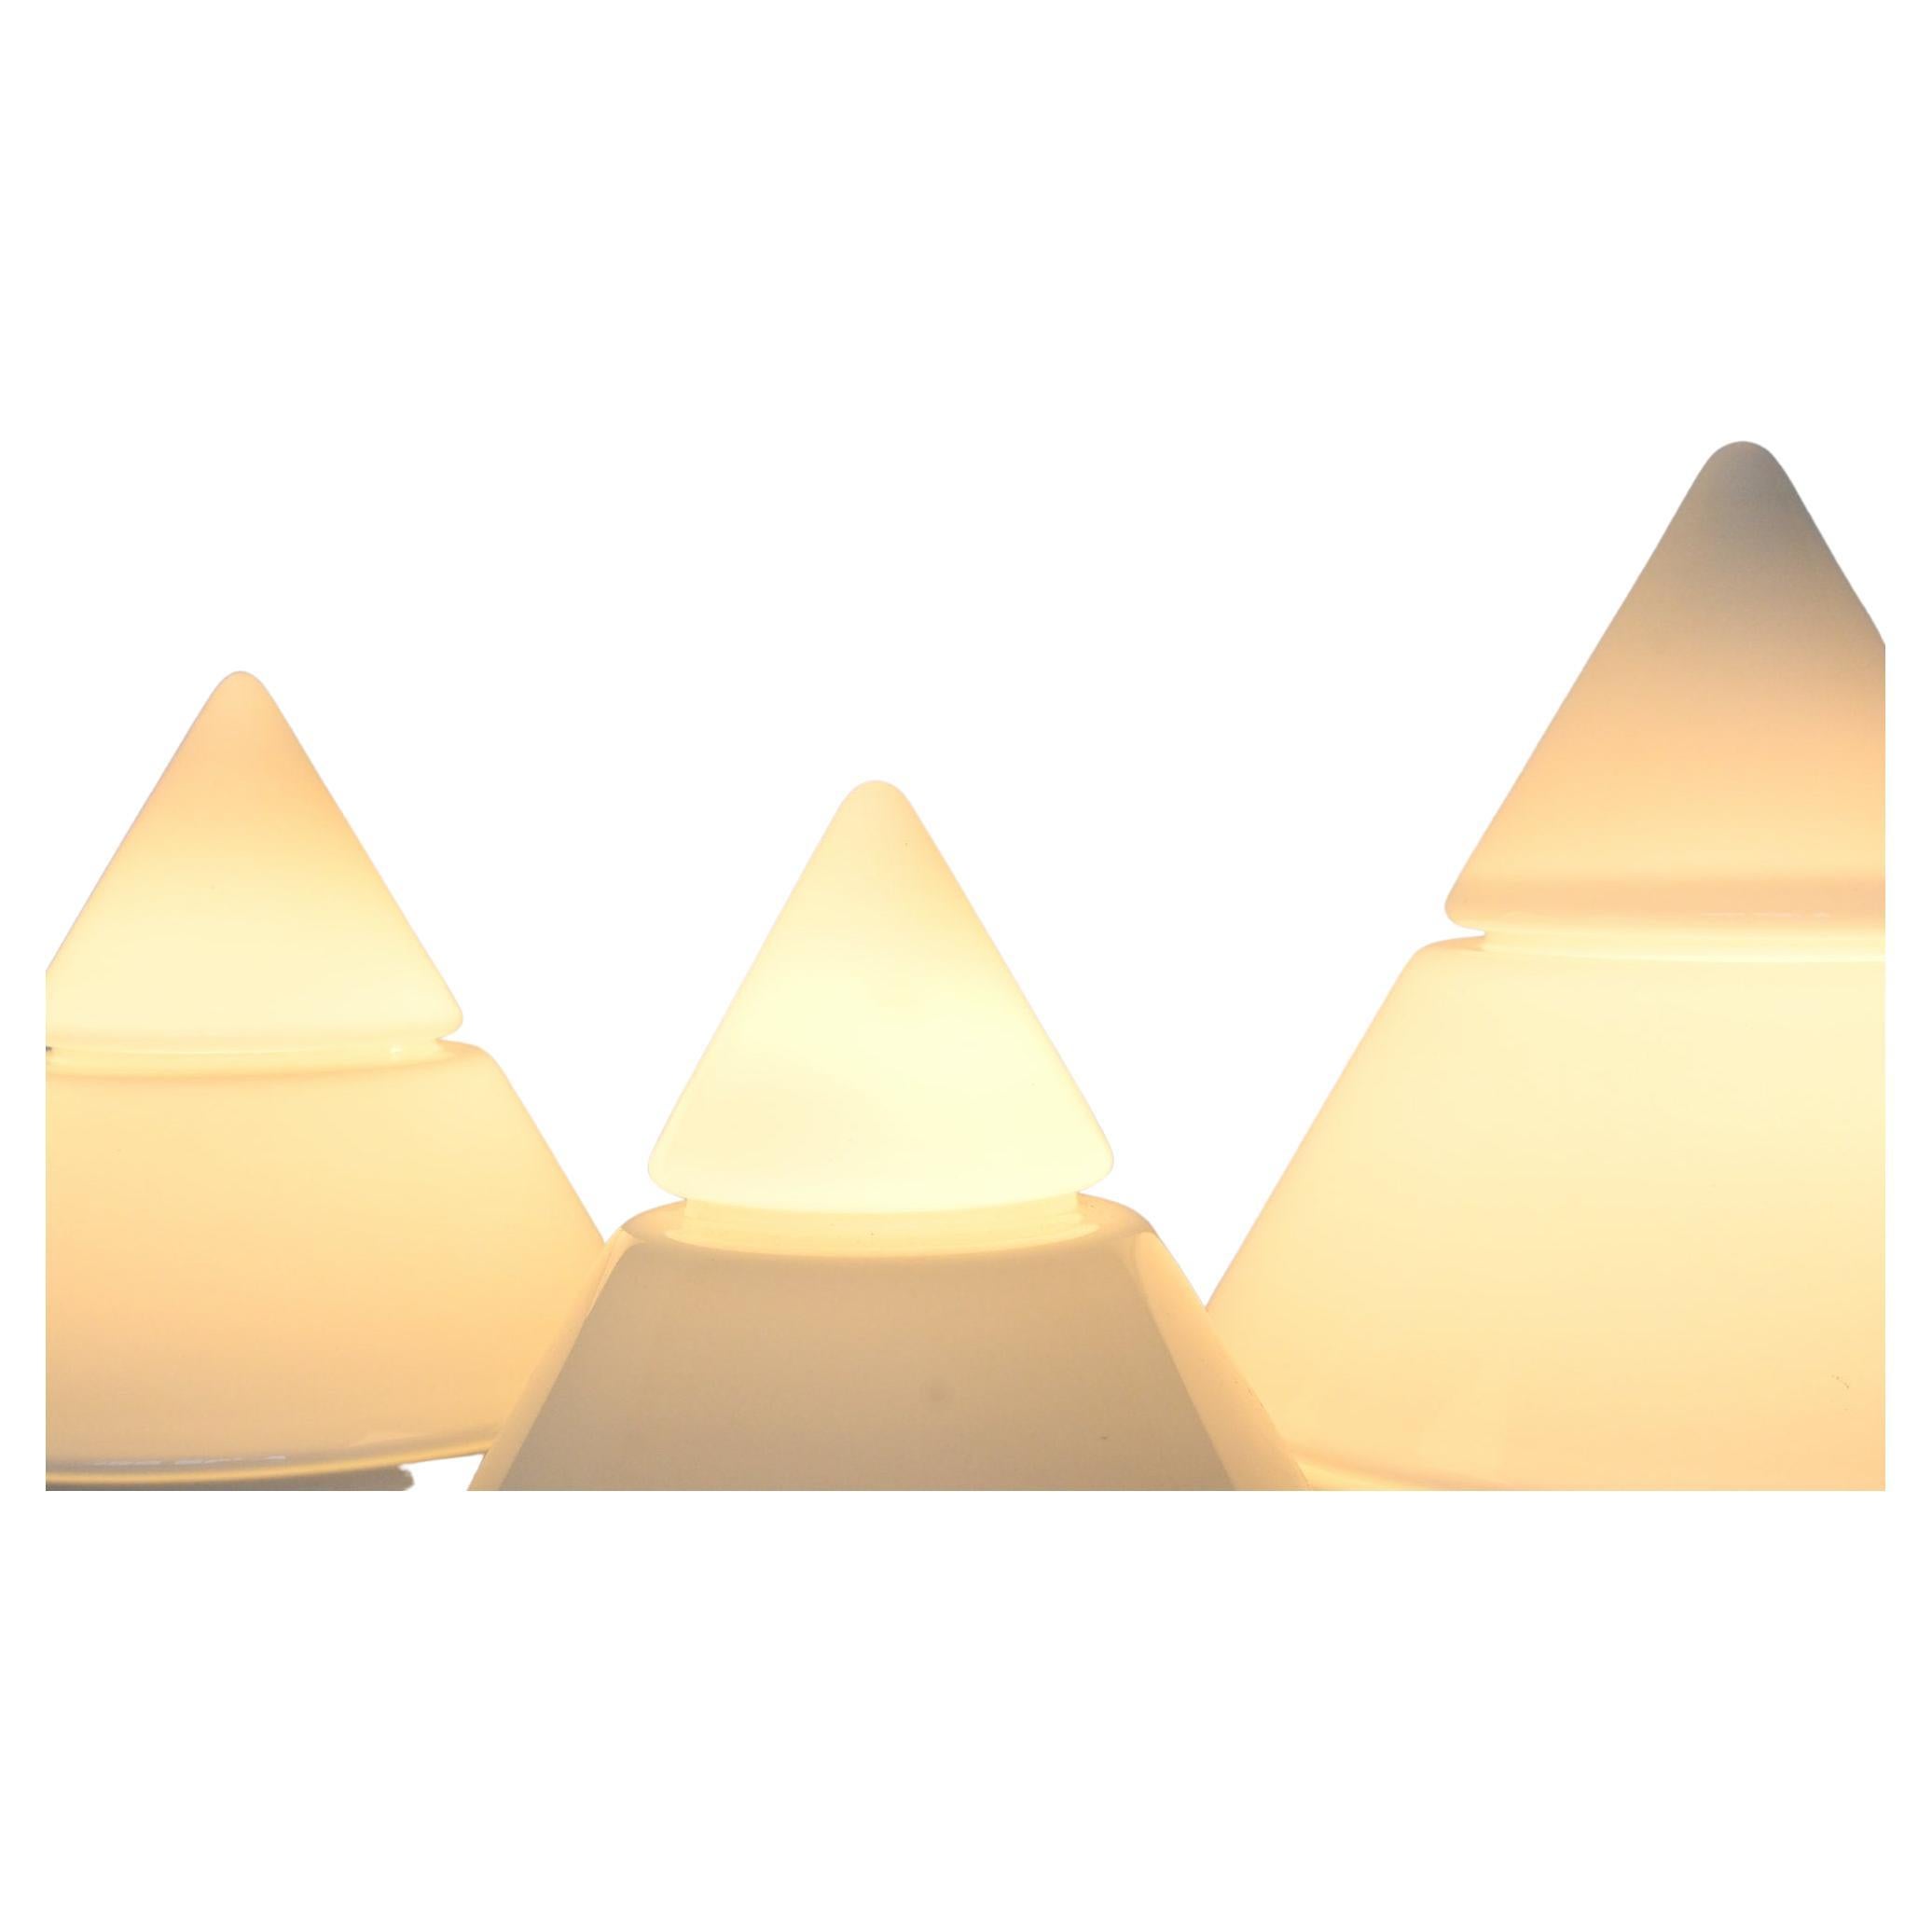 Beautiful set of three “Kilimanjaro” table lamps model D-2136 designed by Sergio Asti for RAAK Amsterdam, The Netherlands 1978. The name comes from a mountain area in Tanzania. This set consists of all three sizes which are available from this